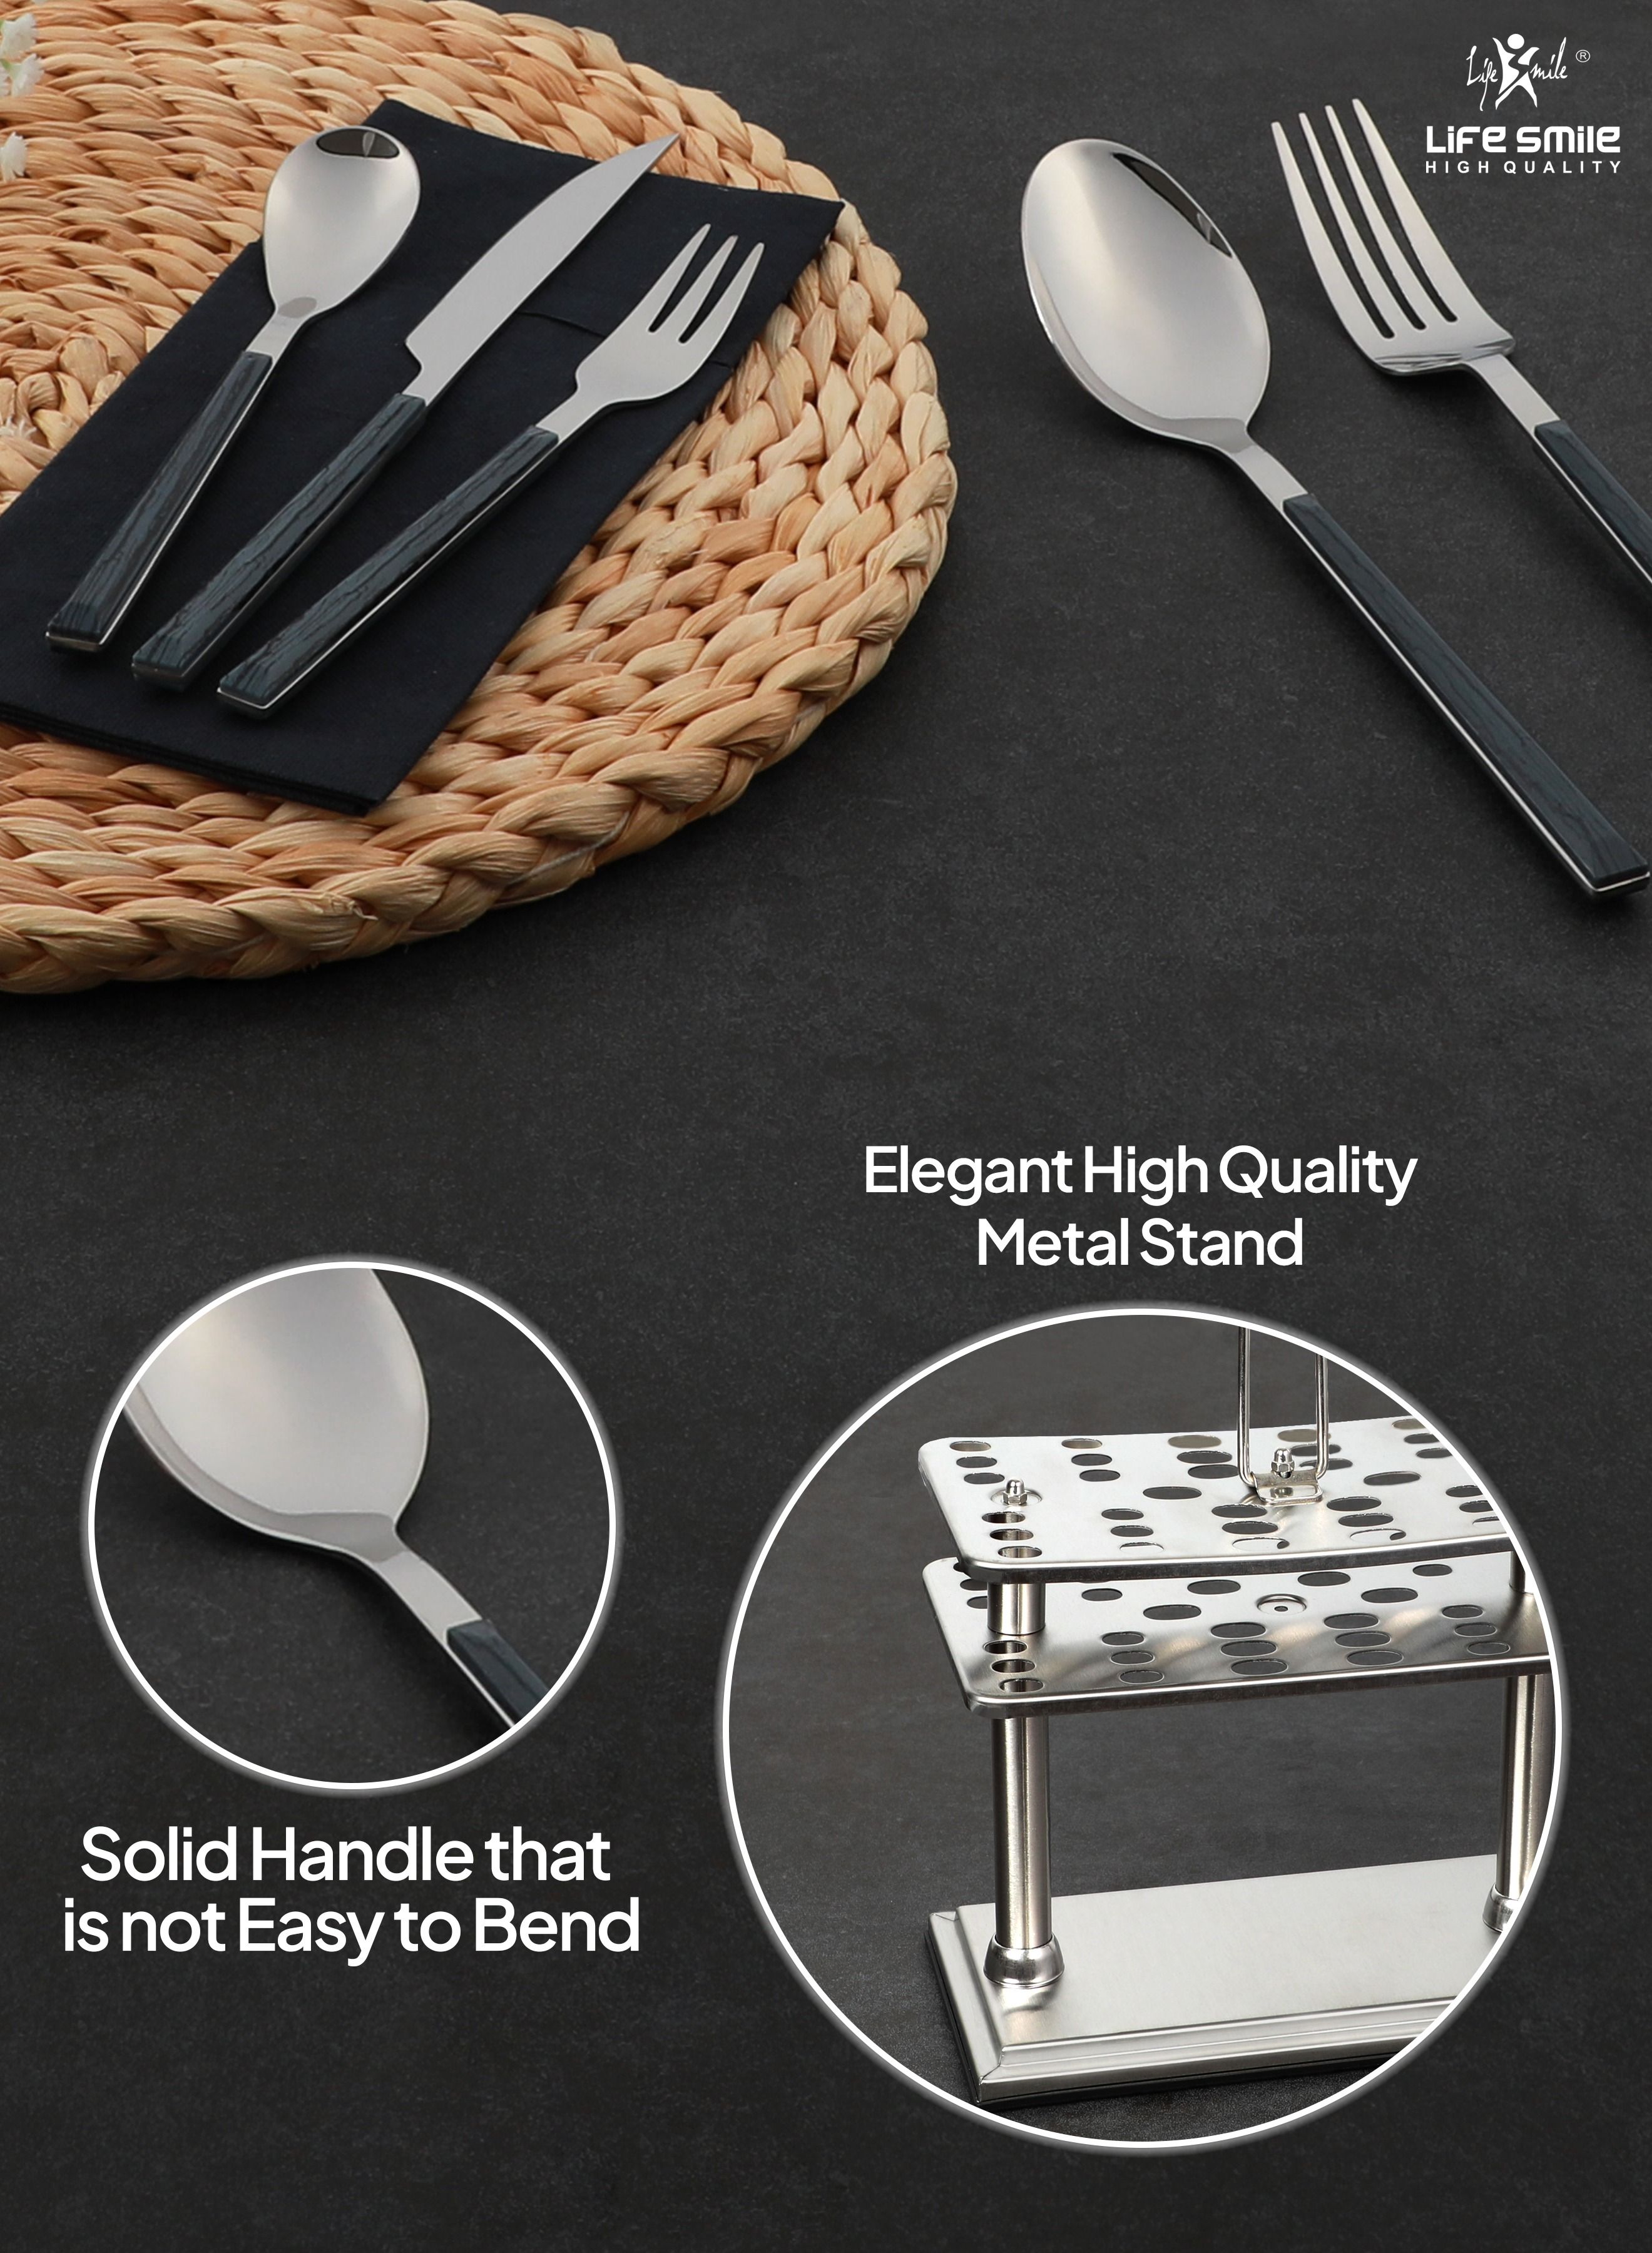 Cutlery Set 38 Piece 18/10 Stainless Steel Flatware Set with Stand Tea & Ice Spoon Dinner & Cake Fork Fruit Knife Soup ladle Rice Server  Mirror Polished -  Service for 6 Pers 